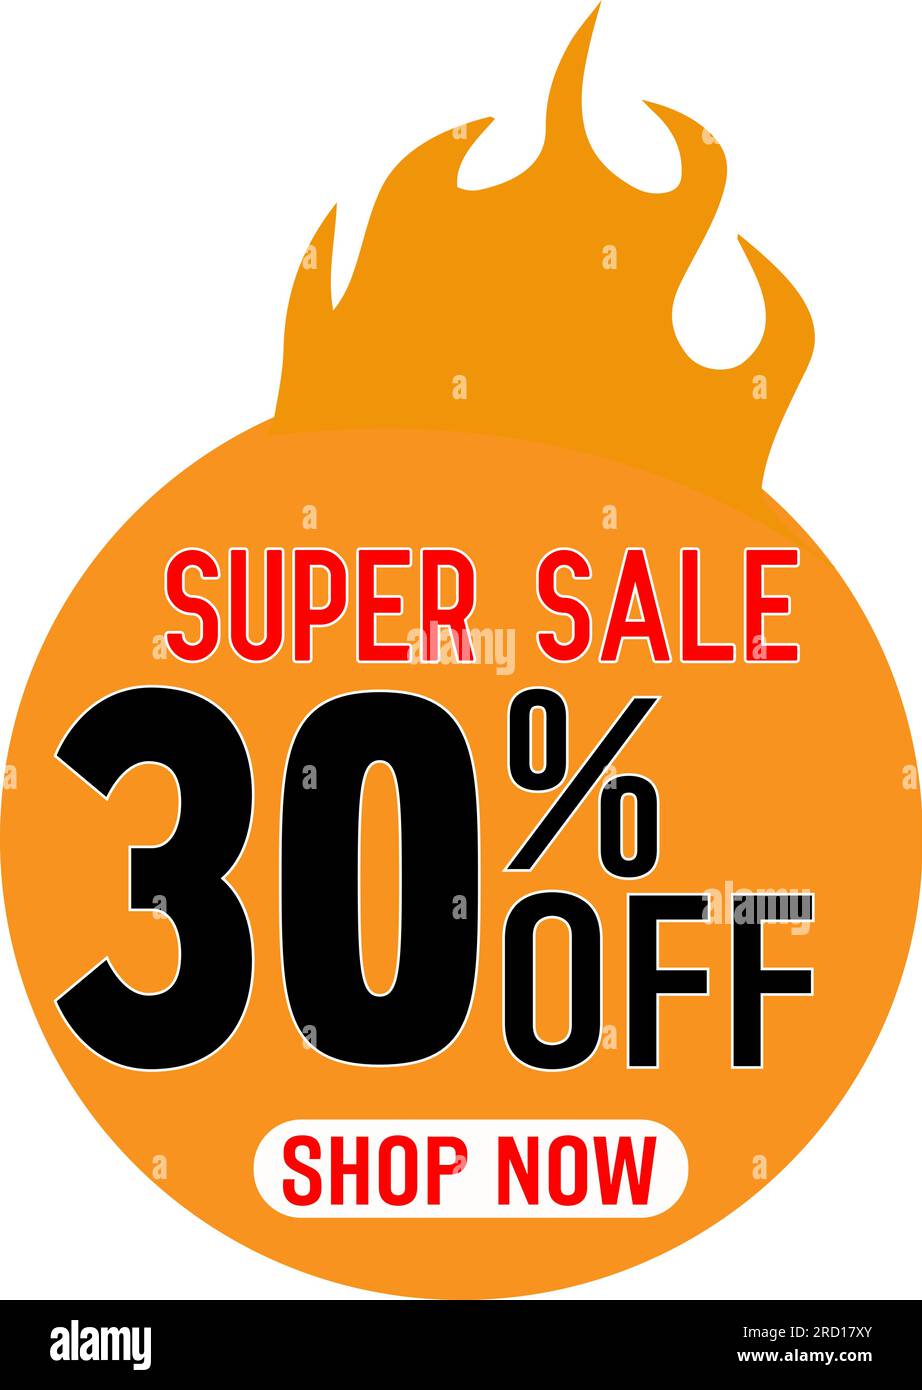 Great Deal Banner or Label for Digital Media Marketing Sale Advertising  Promotion. Discount Hot Offer, Weekend Shopping Stock Vector - Illustration  of banner, poster: 204771281